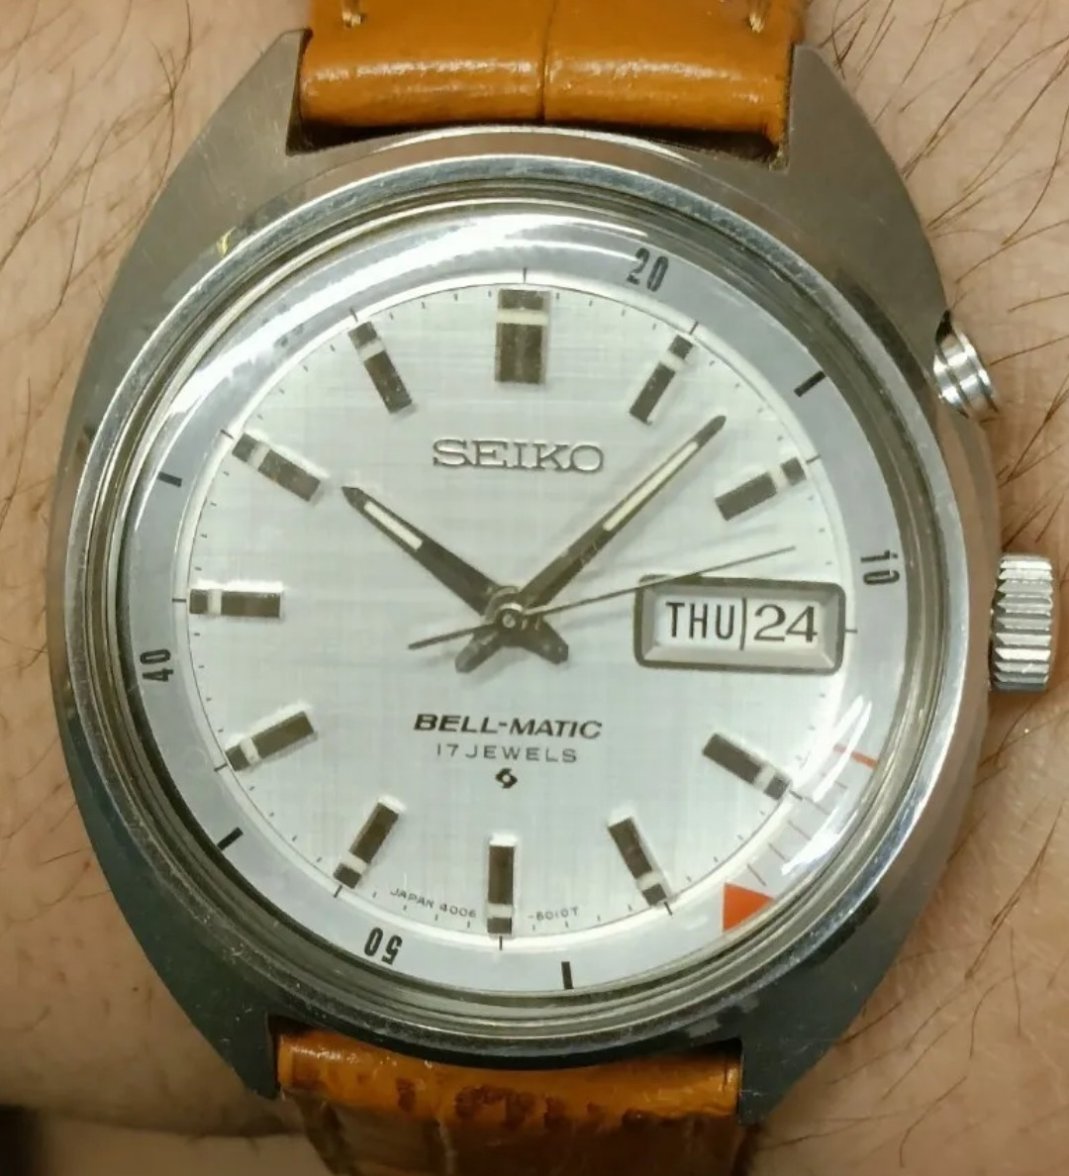 WTB - Seiko Bell-Matic 4006-6010 or 4006-6011 | Omega Forums